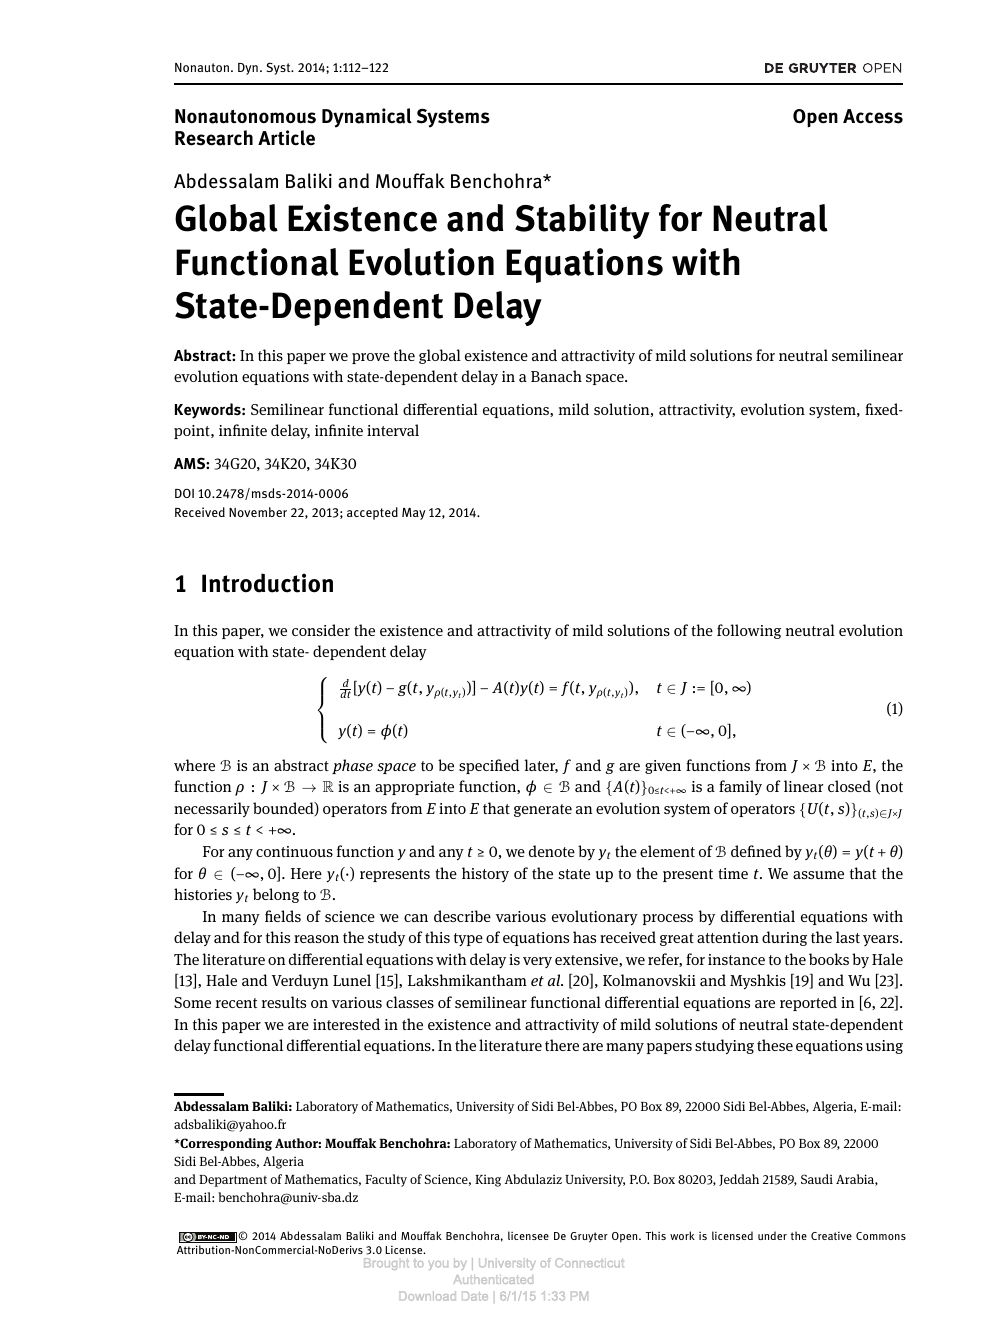 Global Existence And Stability For Neutral Functional Evolution Equations With State Dependent Delay Topic Of Research Paper In Mathematics Download Scholarly Article Pdf And Read For Free On Cyberleninka Open Science Hub